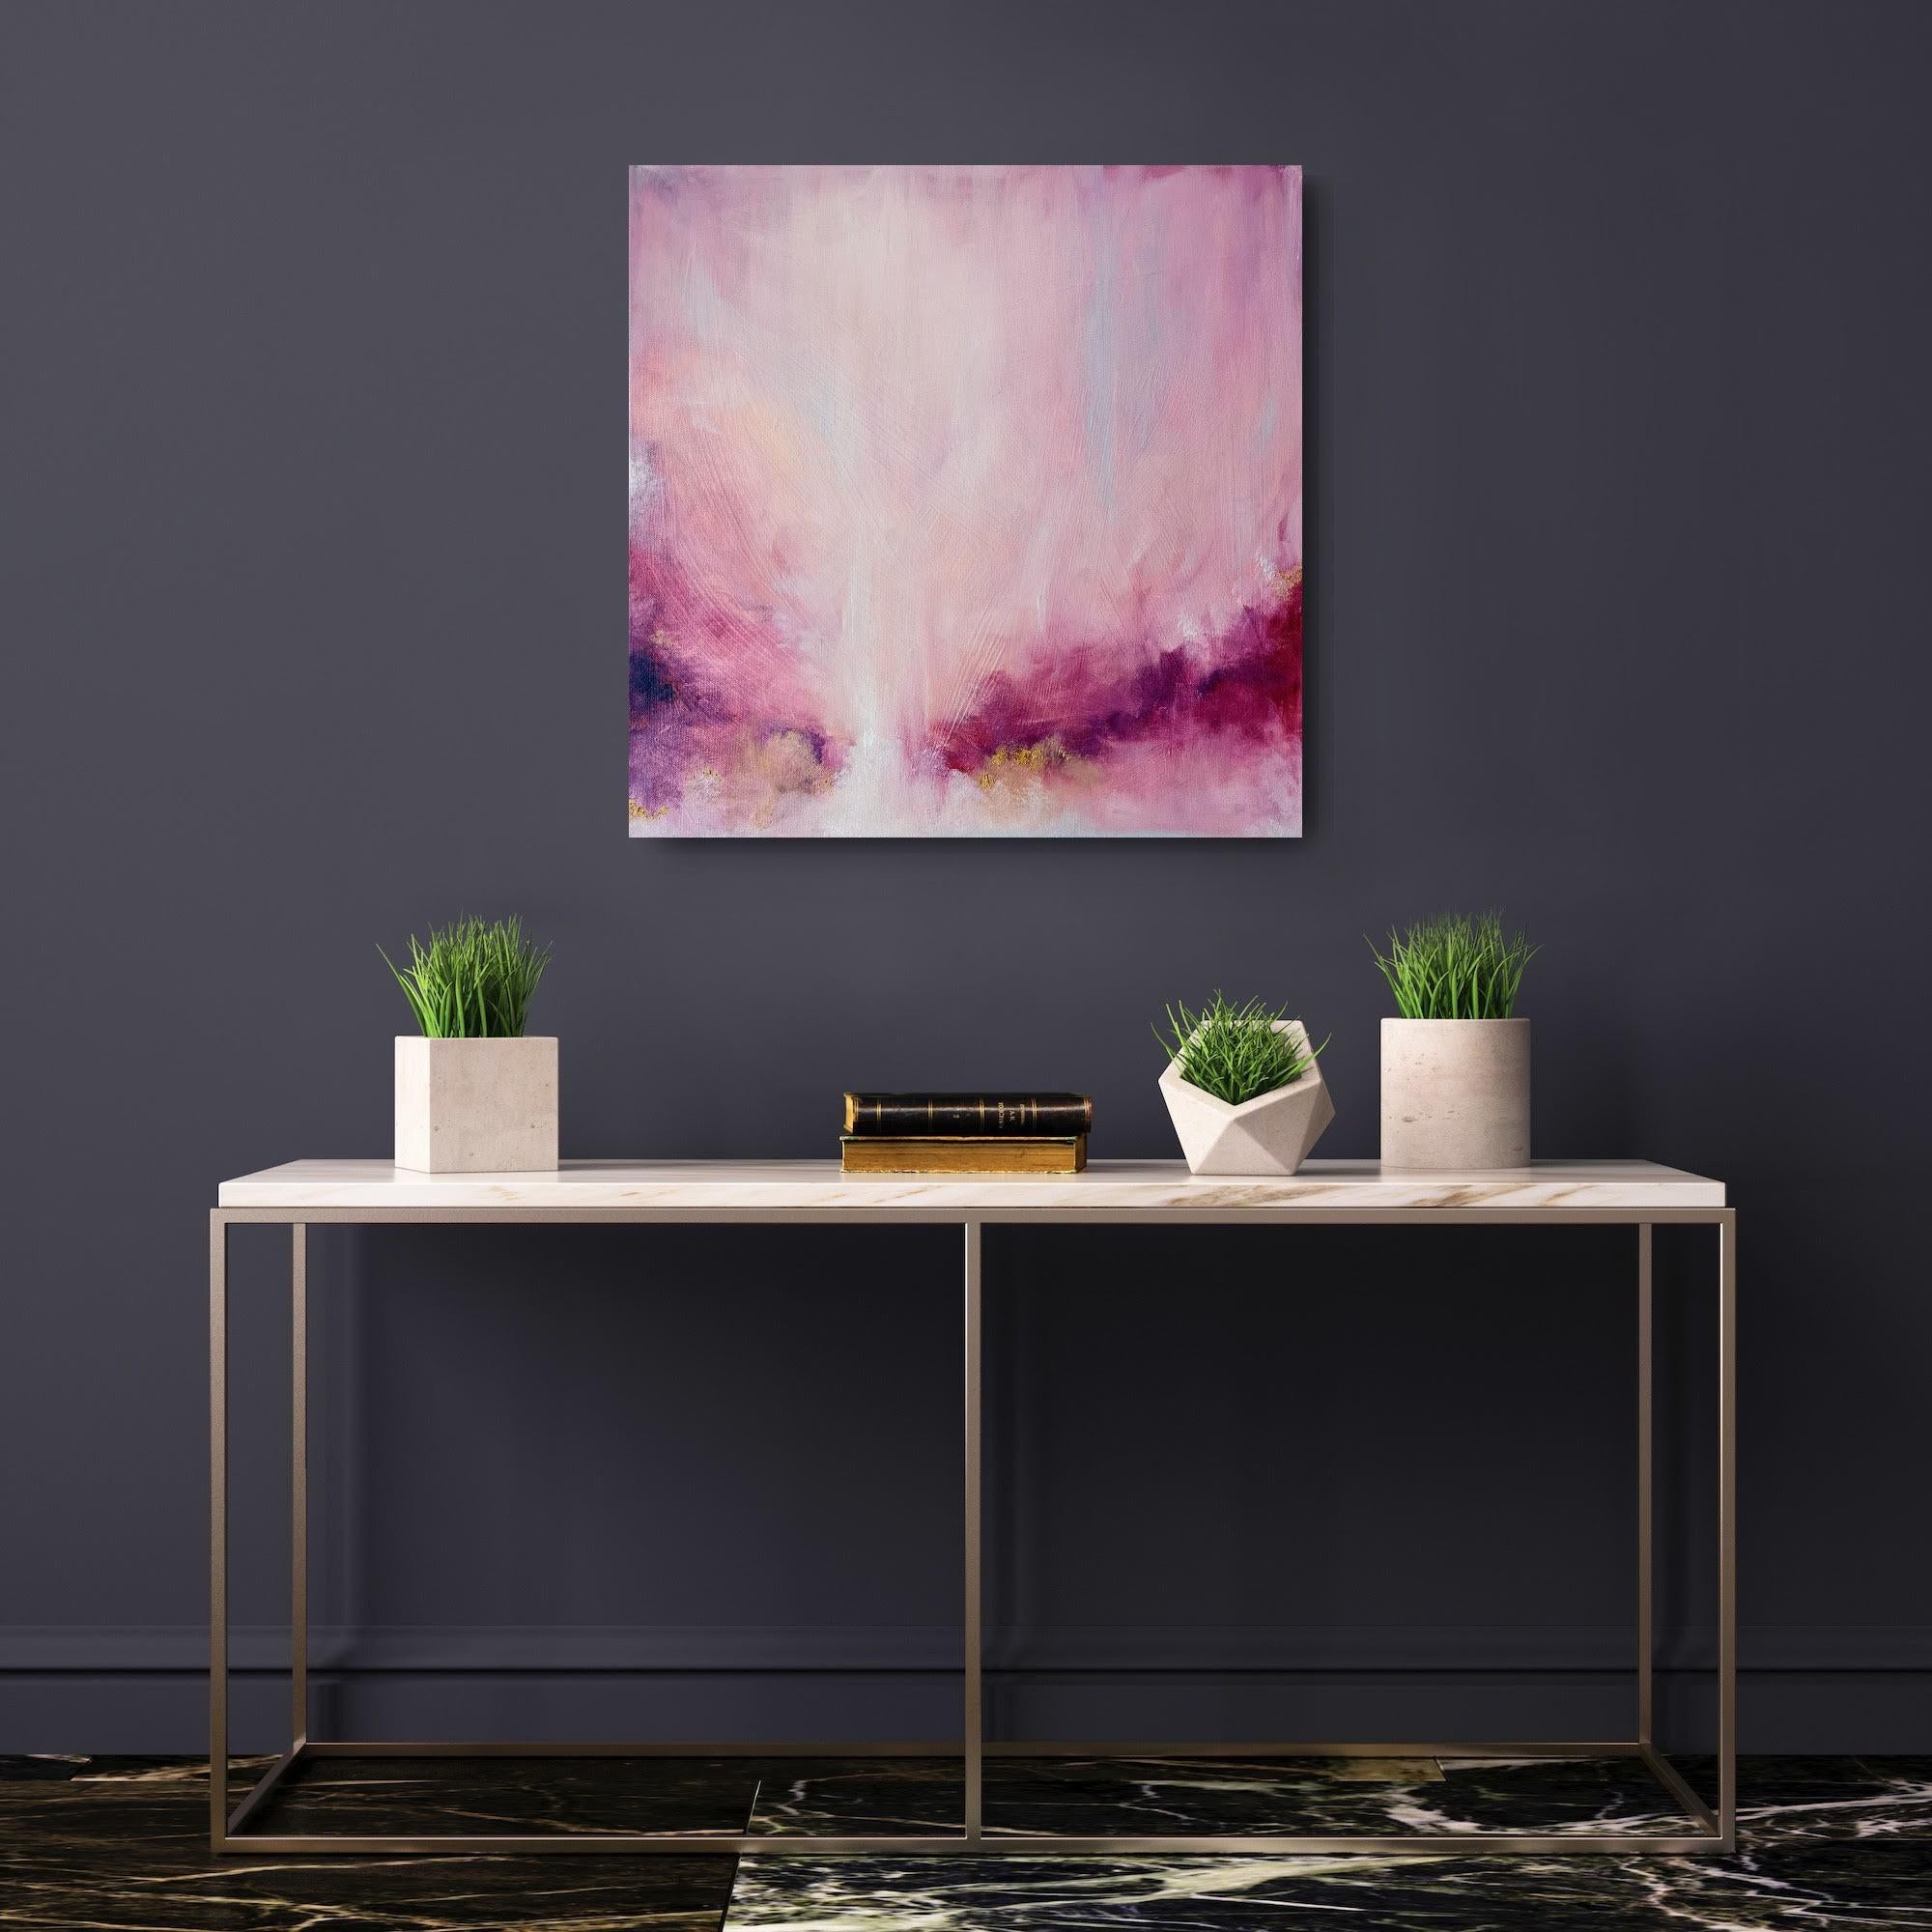 This is why I love you - Pink and gold abstract painting 2